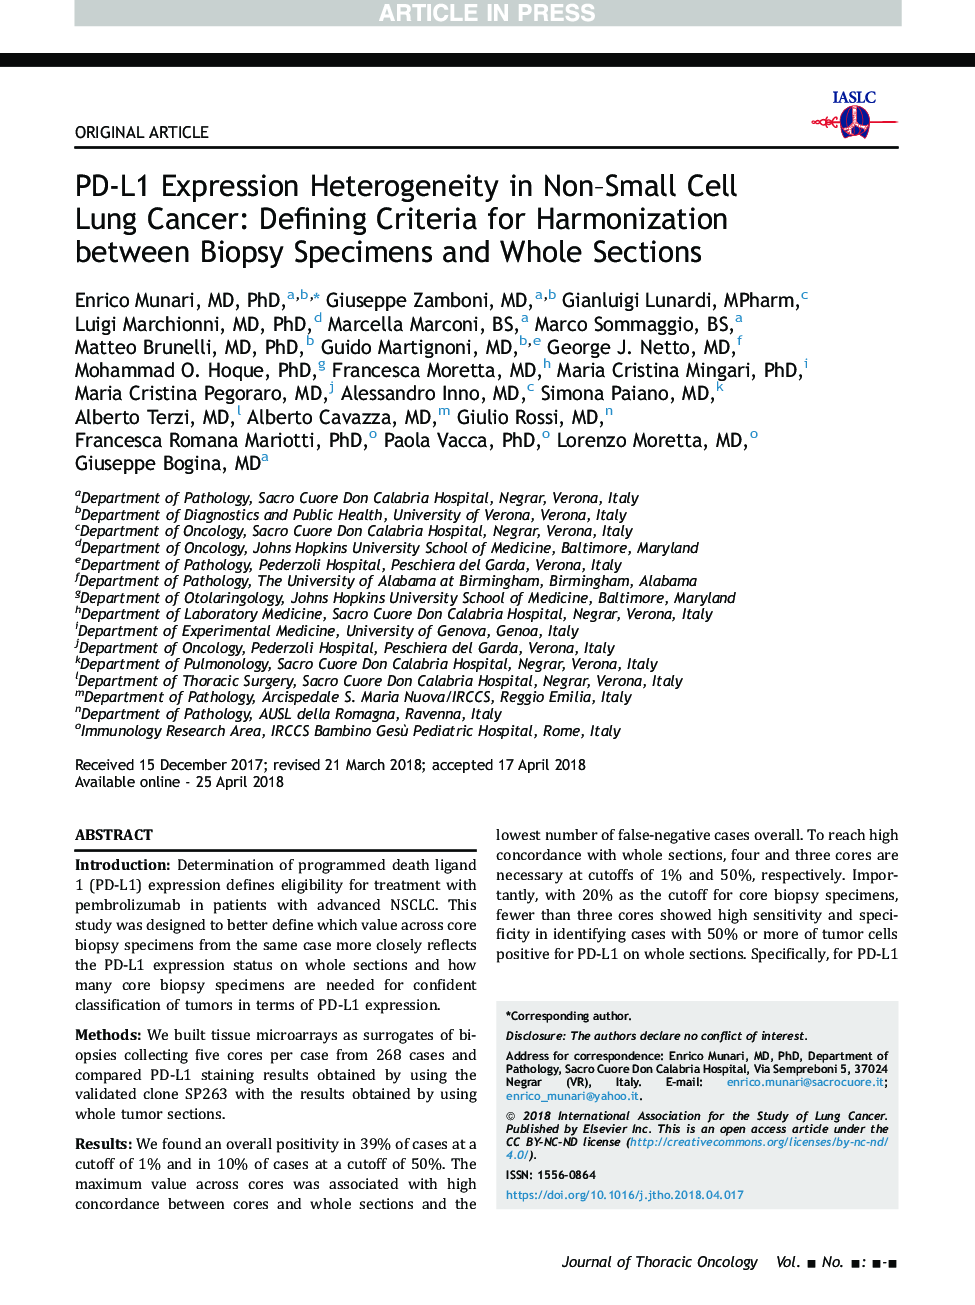 PD-L1 Expression Heterogeneity in Non-Small Cell Lung Cancer: Defining Criteria for Harmonization between Biopsy Specimens and Whole Sections